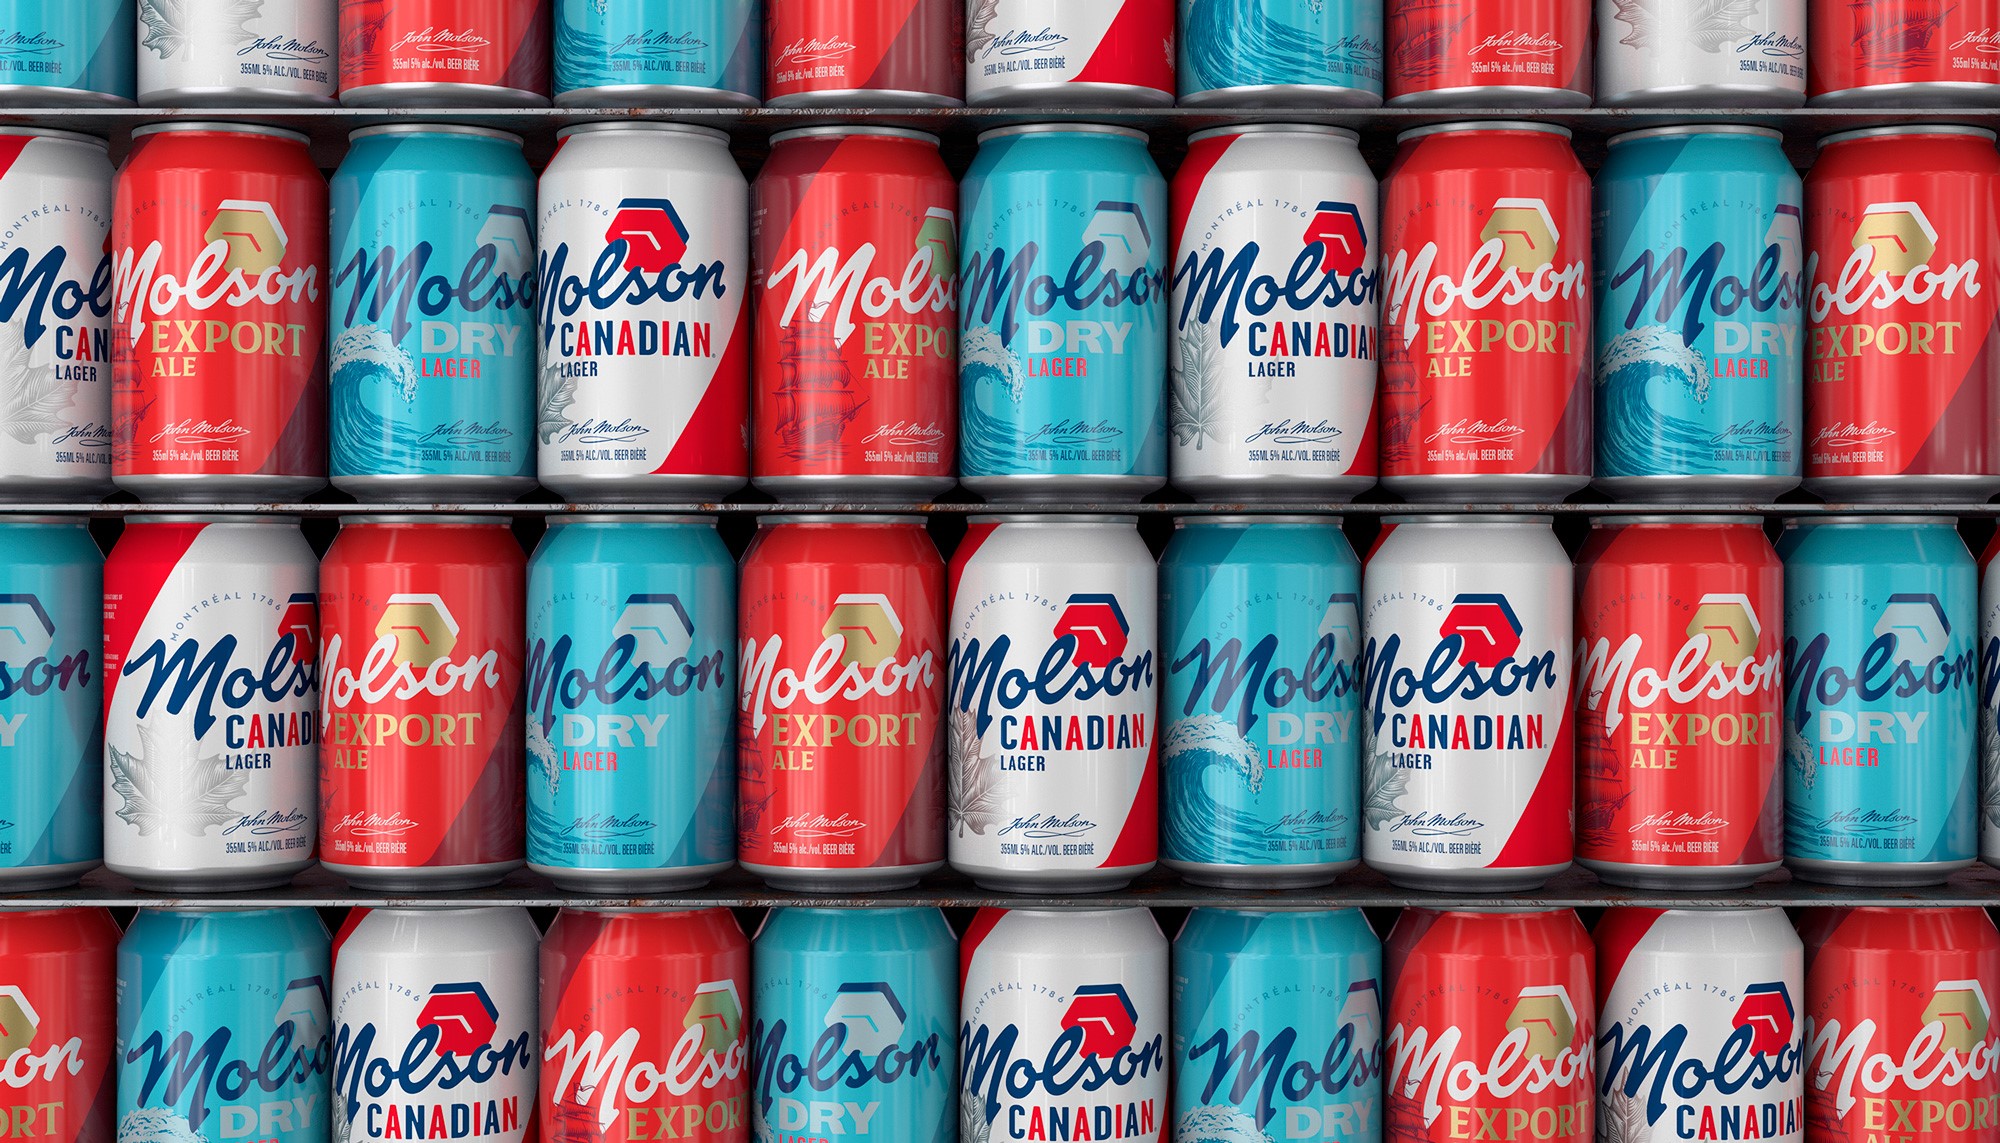 Canada can drink Canadian beer out of Canadian cans